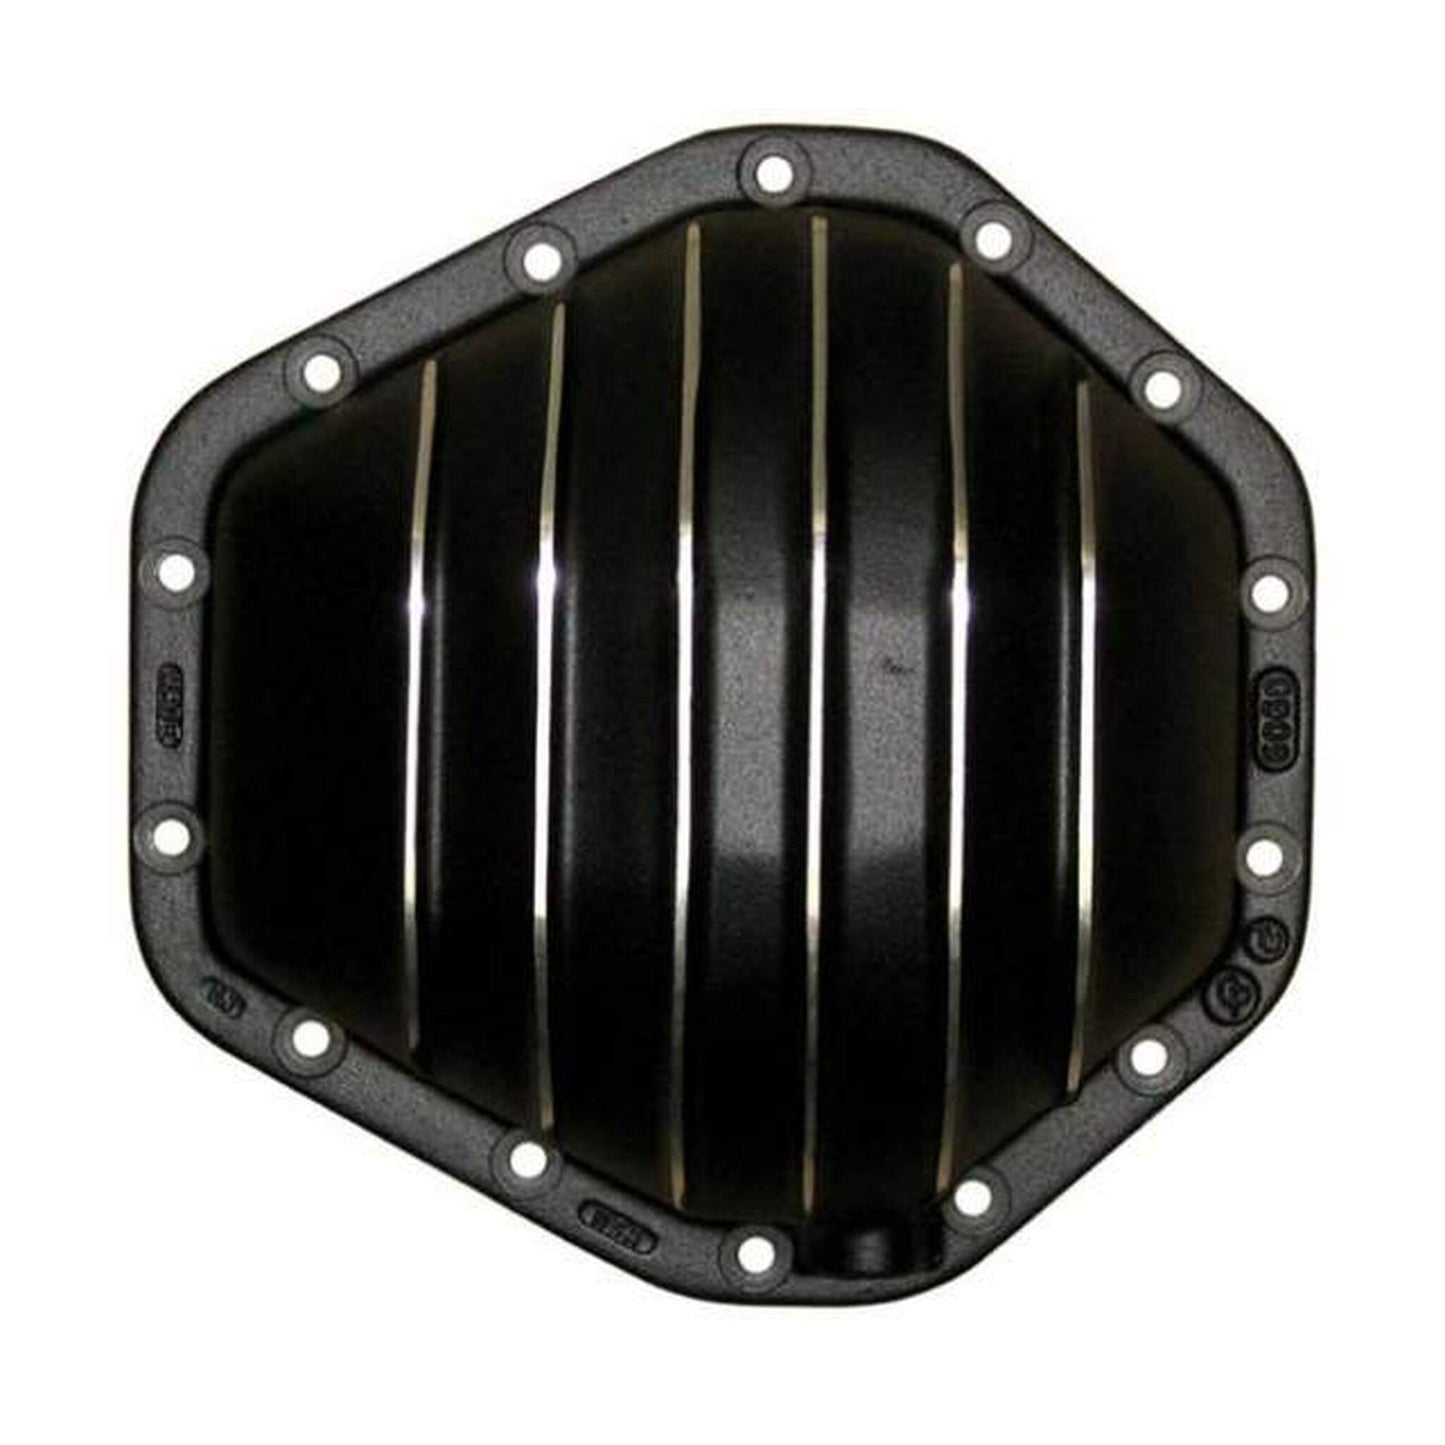 GM 10.5" Rear Differential Cover, 14 Bolt, Straight Fins